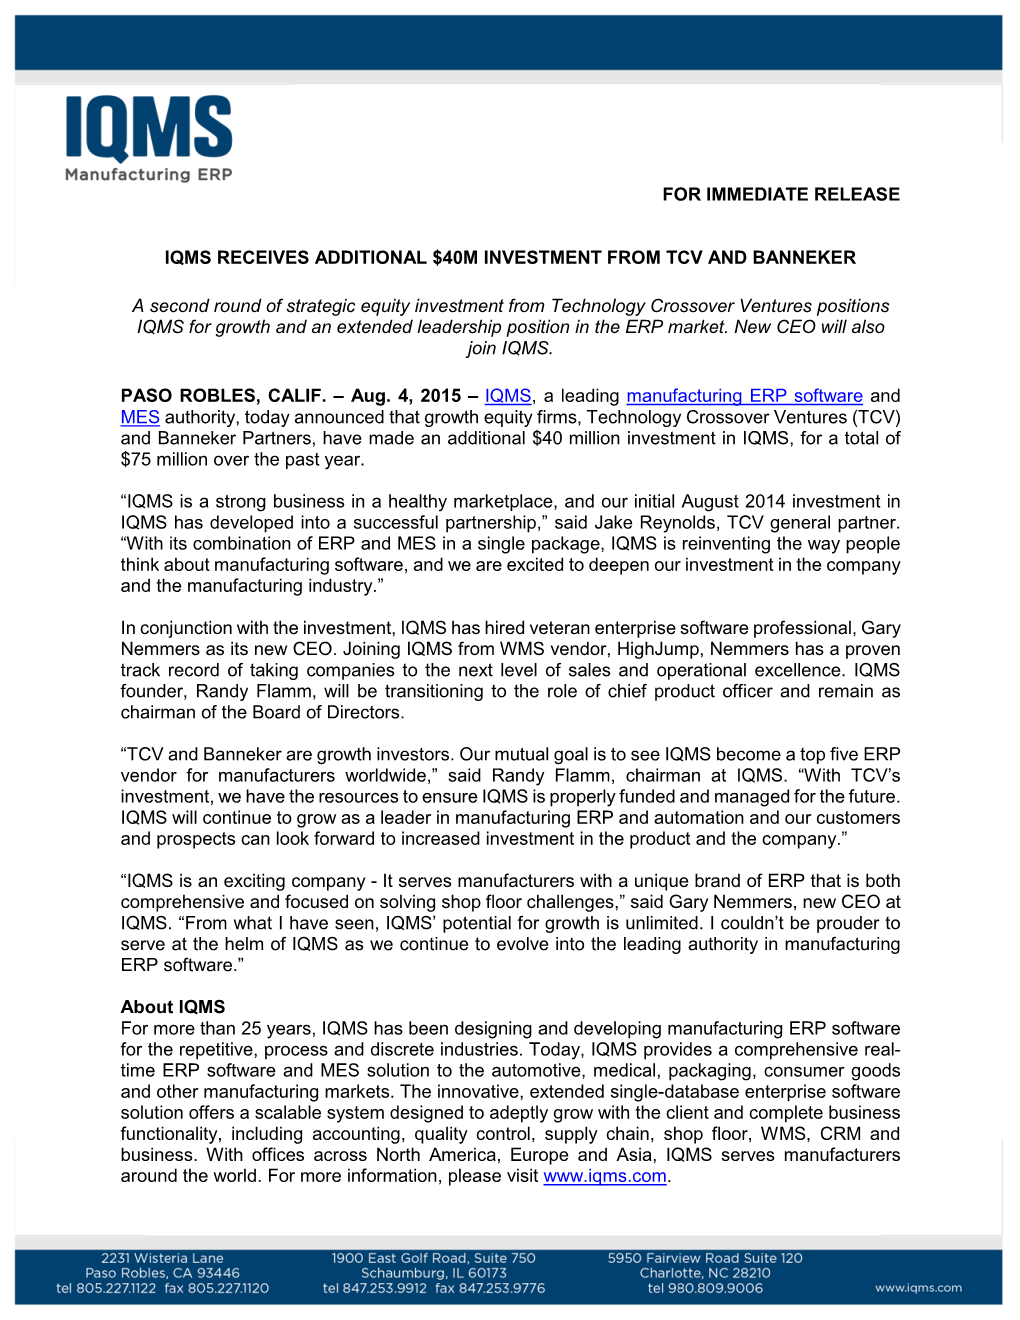 Iqms-Tcv-Investment-And-New-Ceo.Pdf